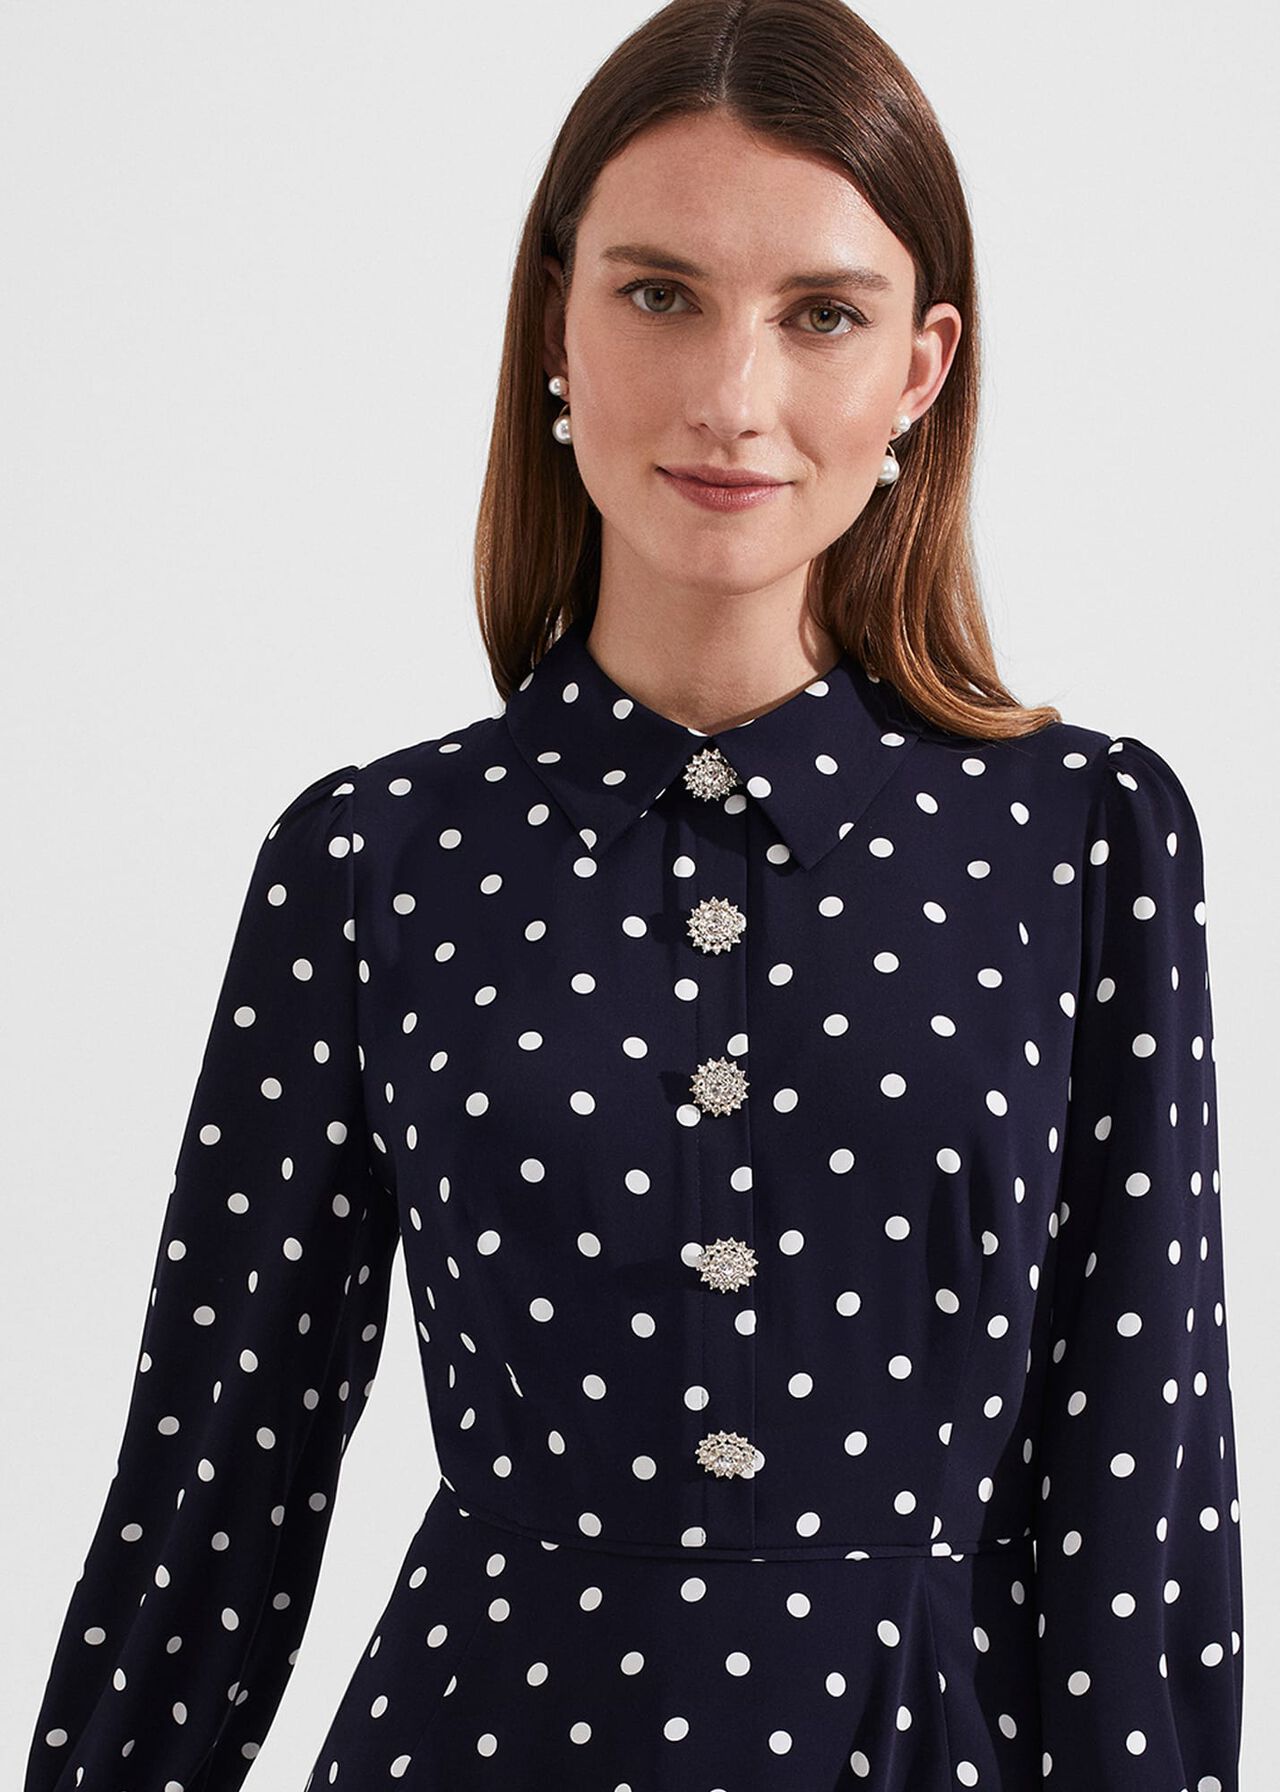 Ayla Spot Fit And Flare Dress